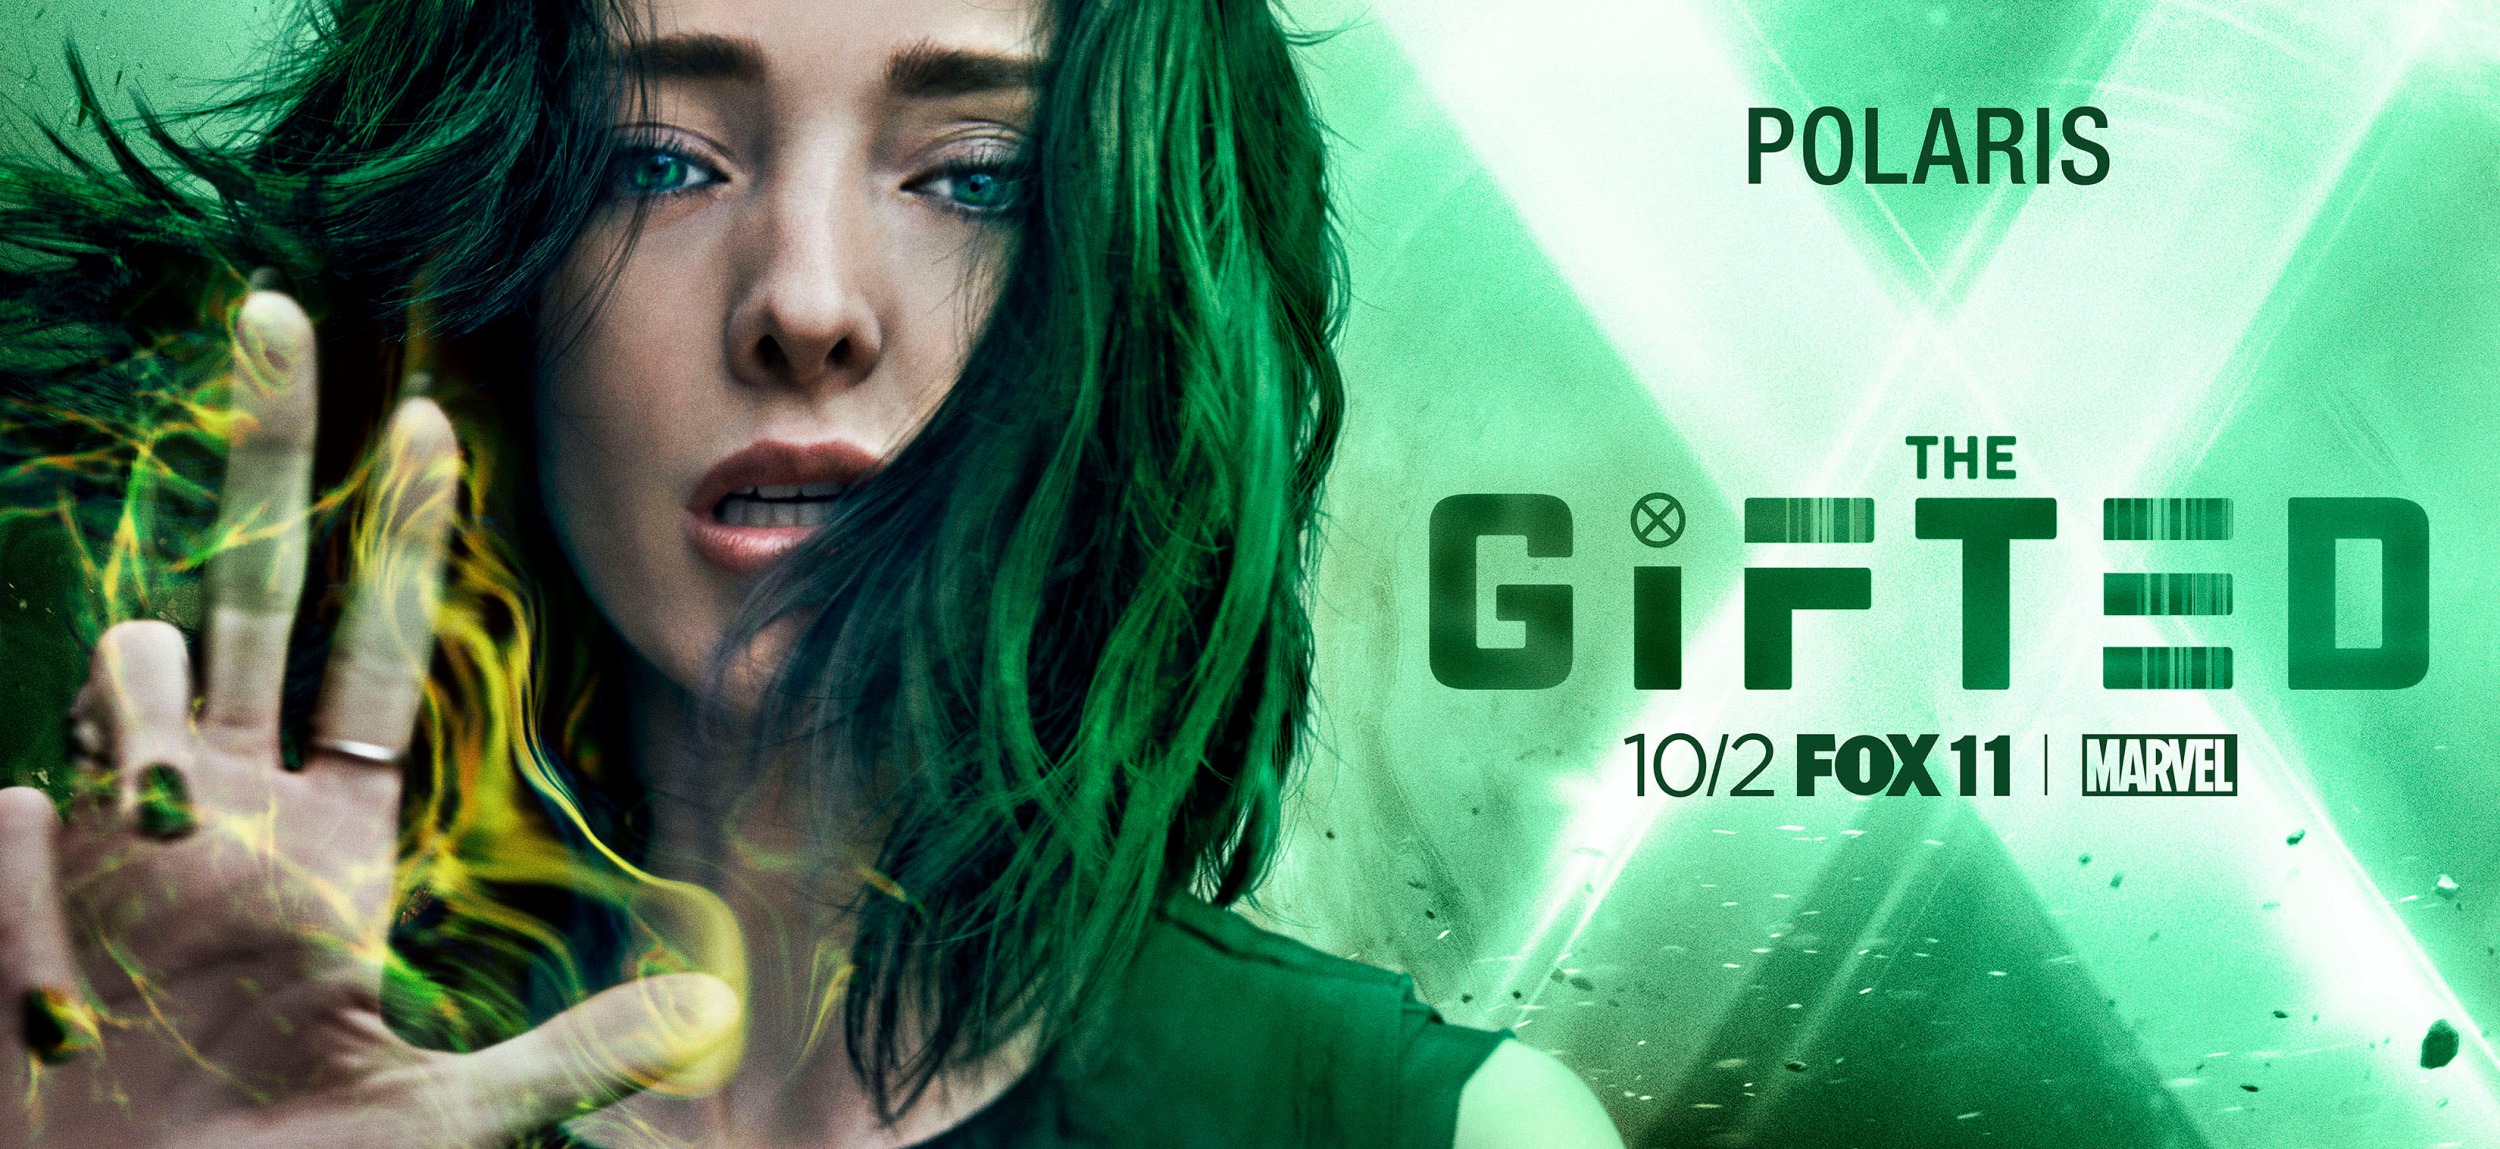 Mega Sized TV Poster Image for The Gifted (#5 of 13)